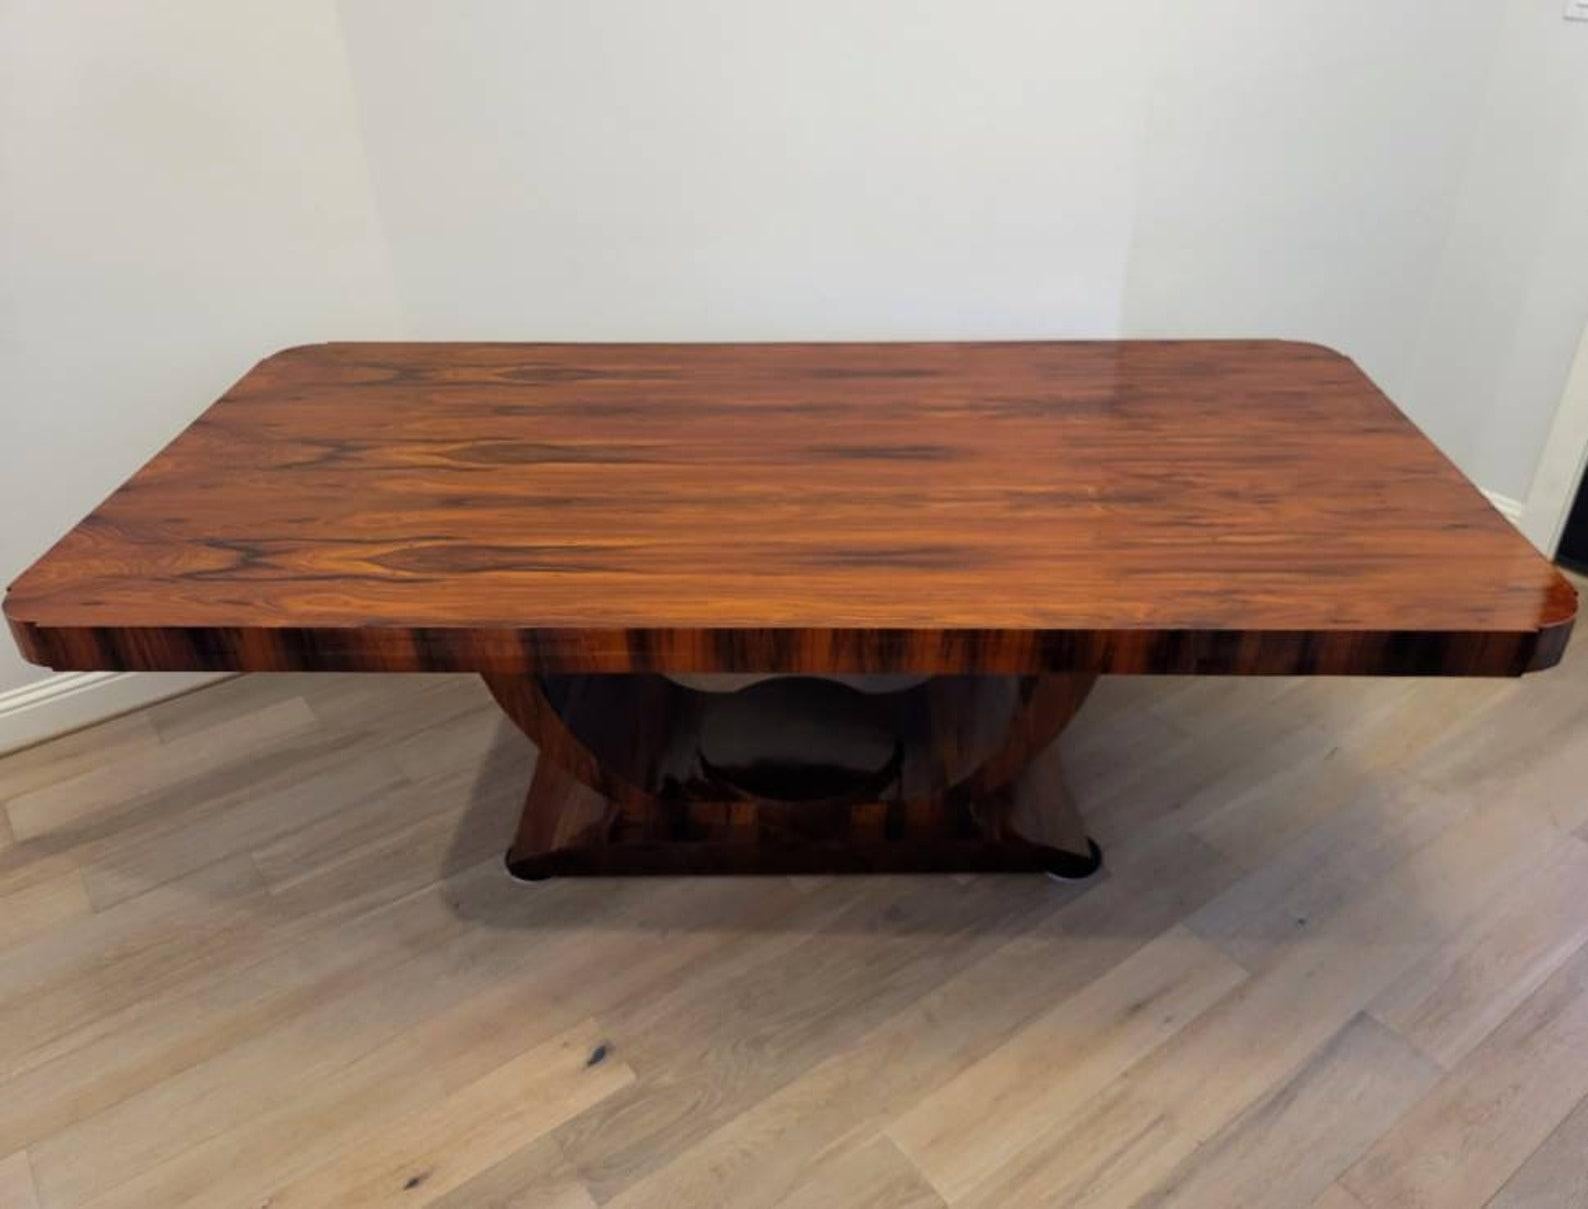 A stunning vintage French Art Deco table in striking palisander / rosewood. Fine Parisian craftsmanship, refined elegant sophistication, luxury, and exotic woods, with its sleek stylized geometric form, clean lines and luxurious polished finish, the